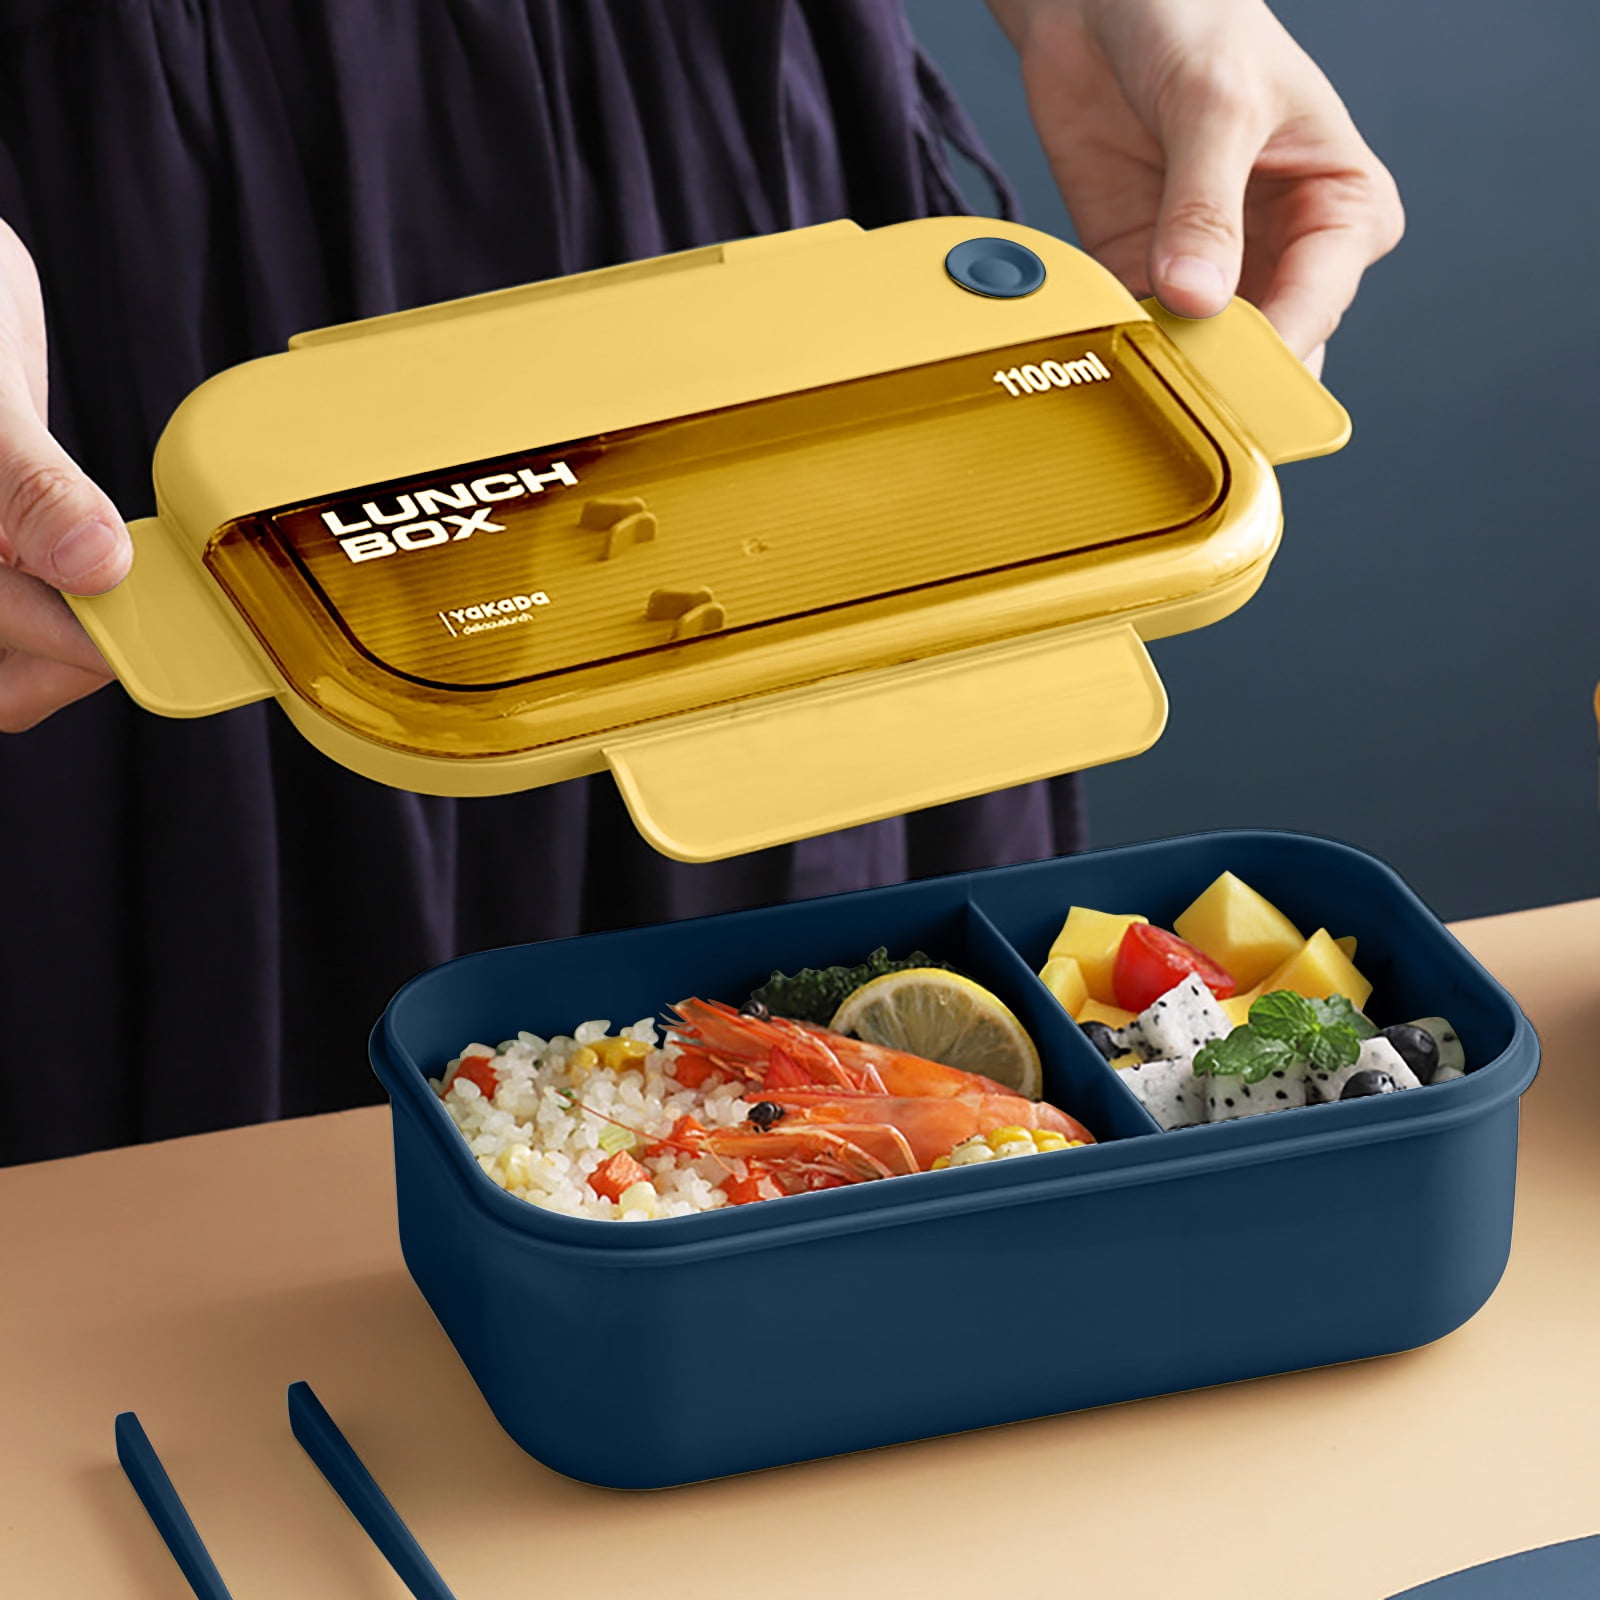 Caperci Stackable Bento Box Adult Lunch Box - 3 Layers All-in-One